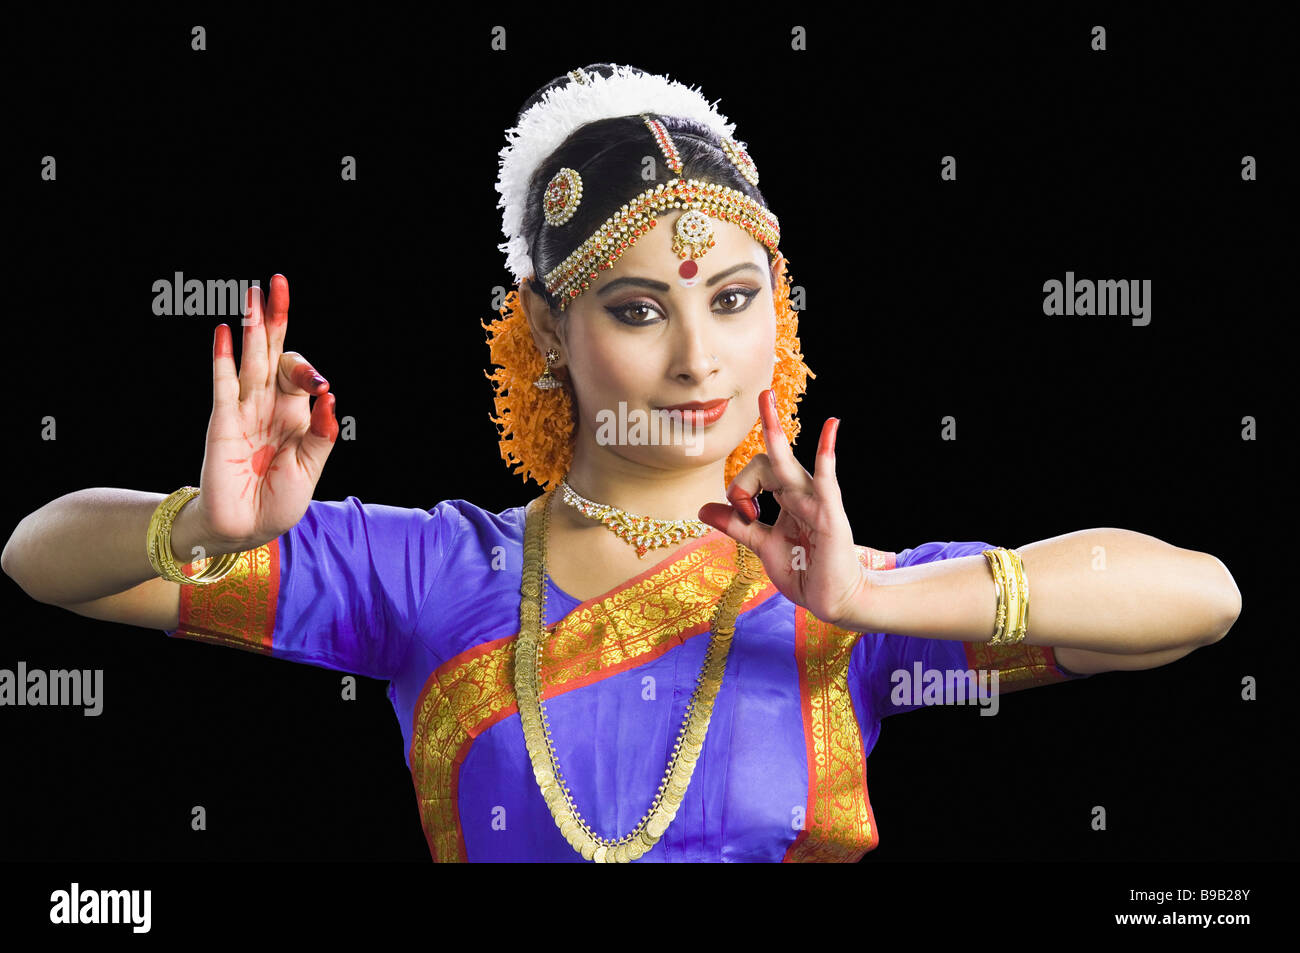 South Indian female dancer performing Bharatnatyam the classical dance of India Stock Photo